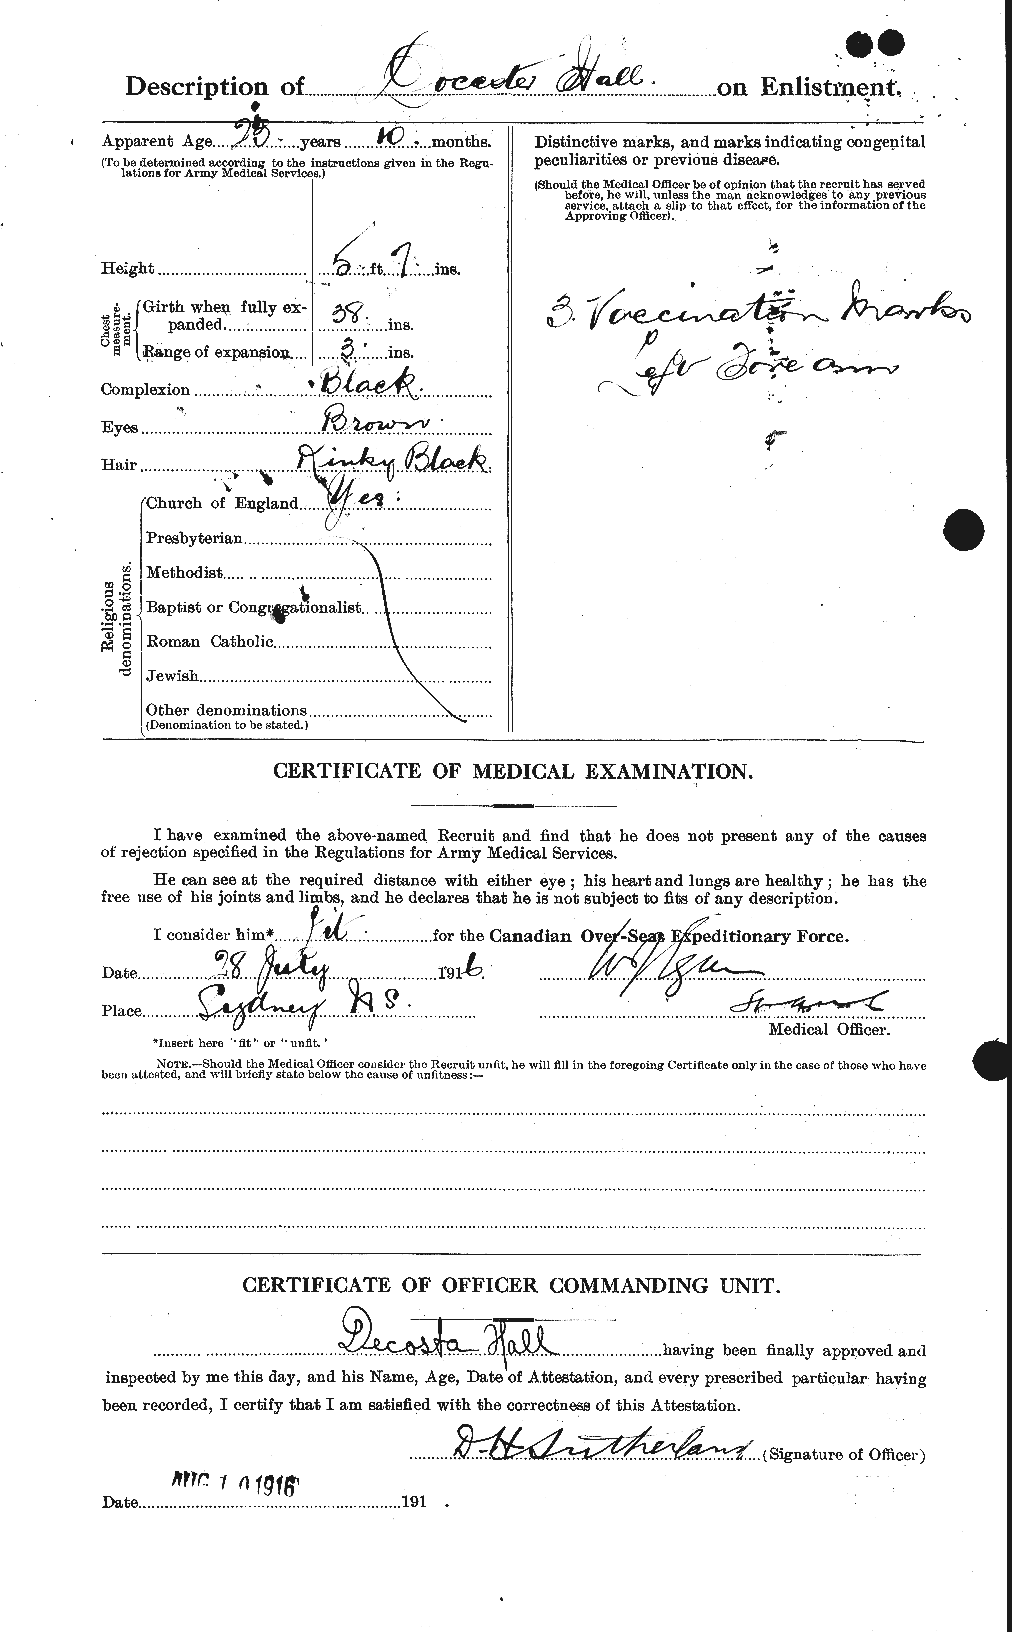 Personnel Records of the First World War - CEF 372681b